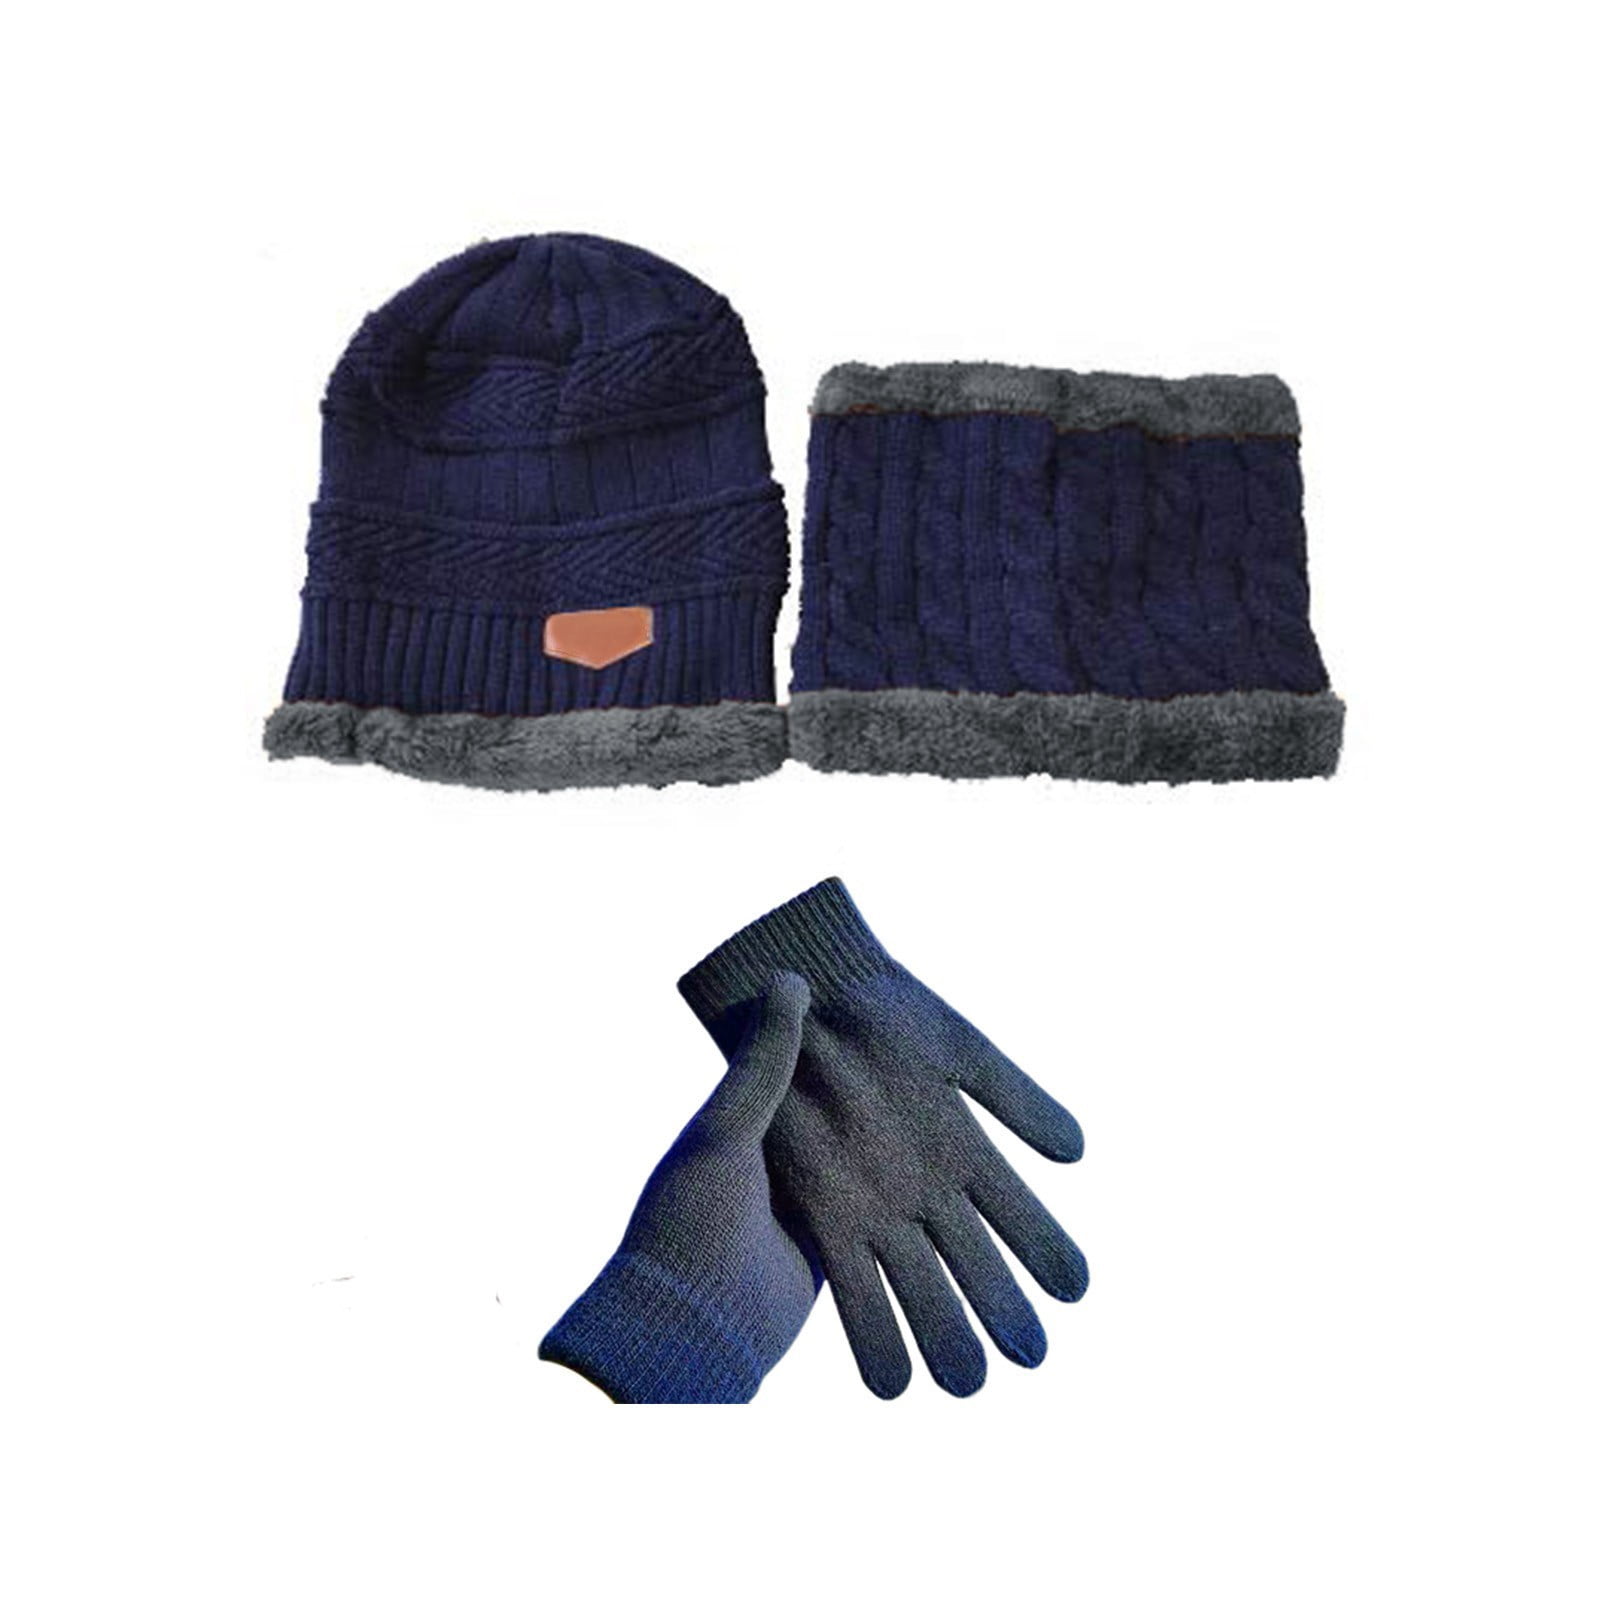 Big Sale! Beshee Hat and Scarf Set for Women Hat Scarf Gloves Set ...